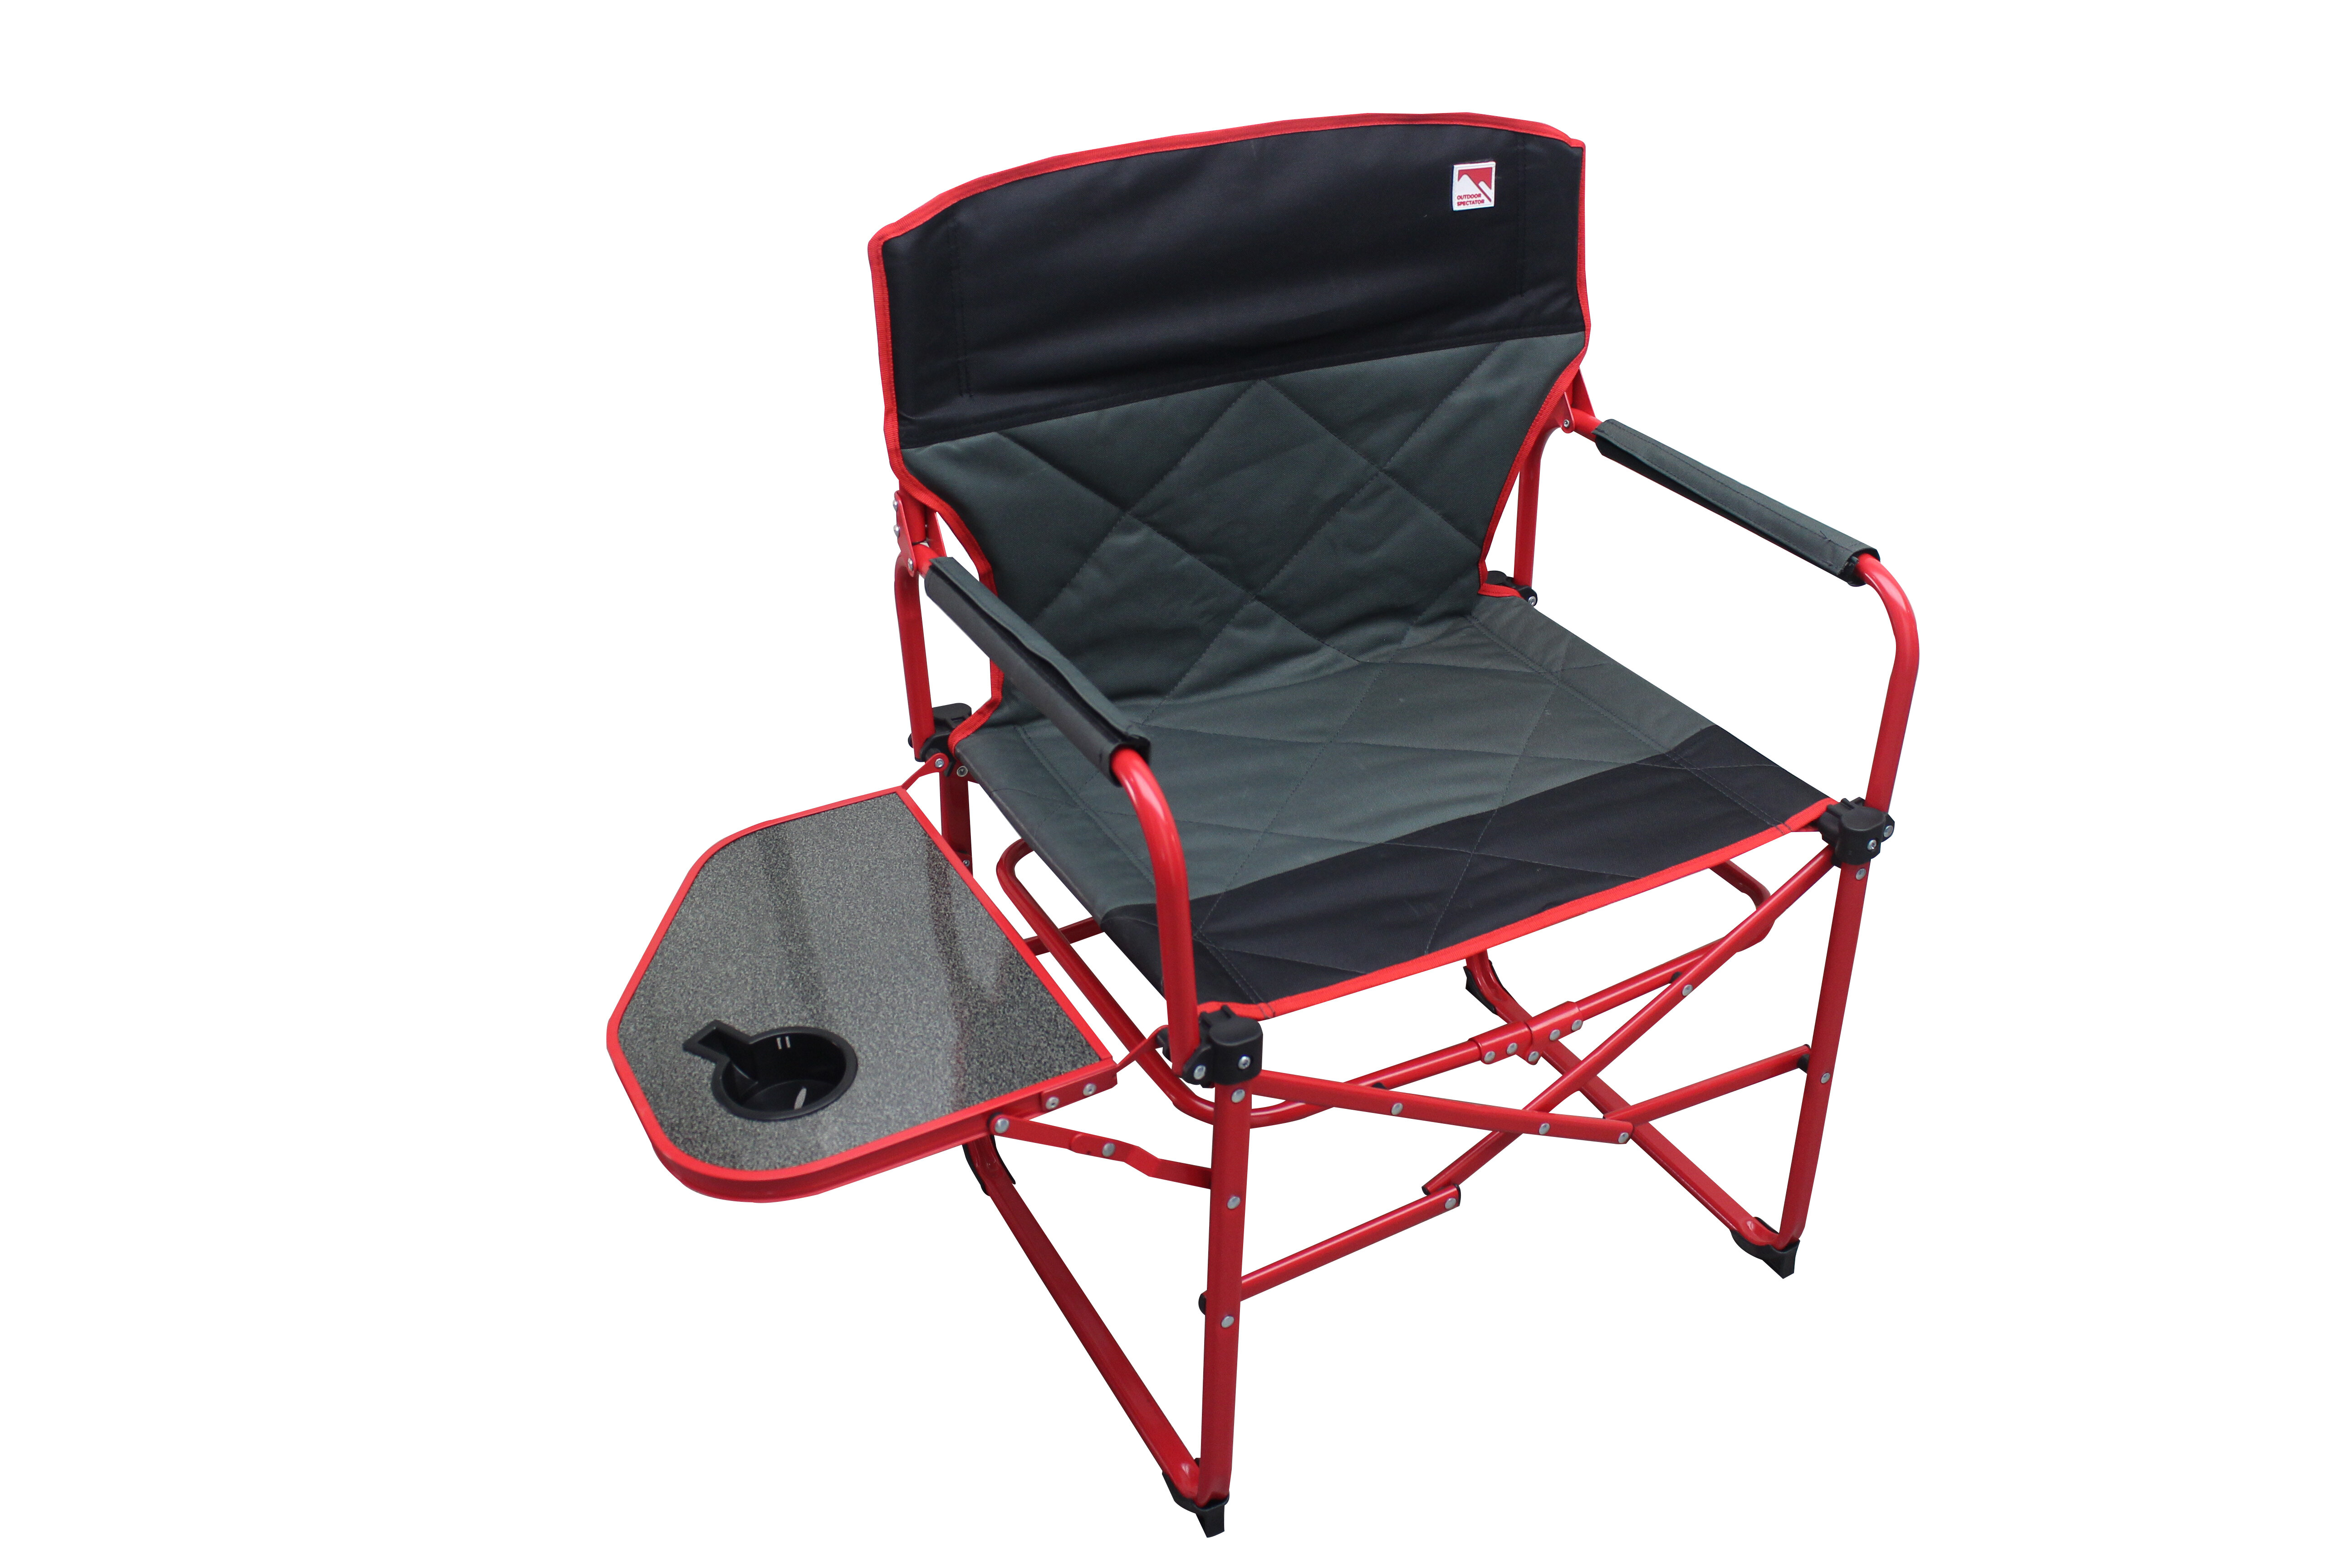 Kamp-Rite Portable Compact-Fold Director's Chair with Side Table & Cup  Holder for Camping, Tailgating, and Sports, 225 LB Capacity, Green/Black